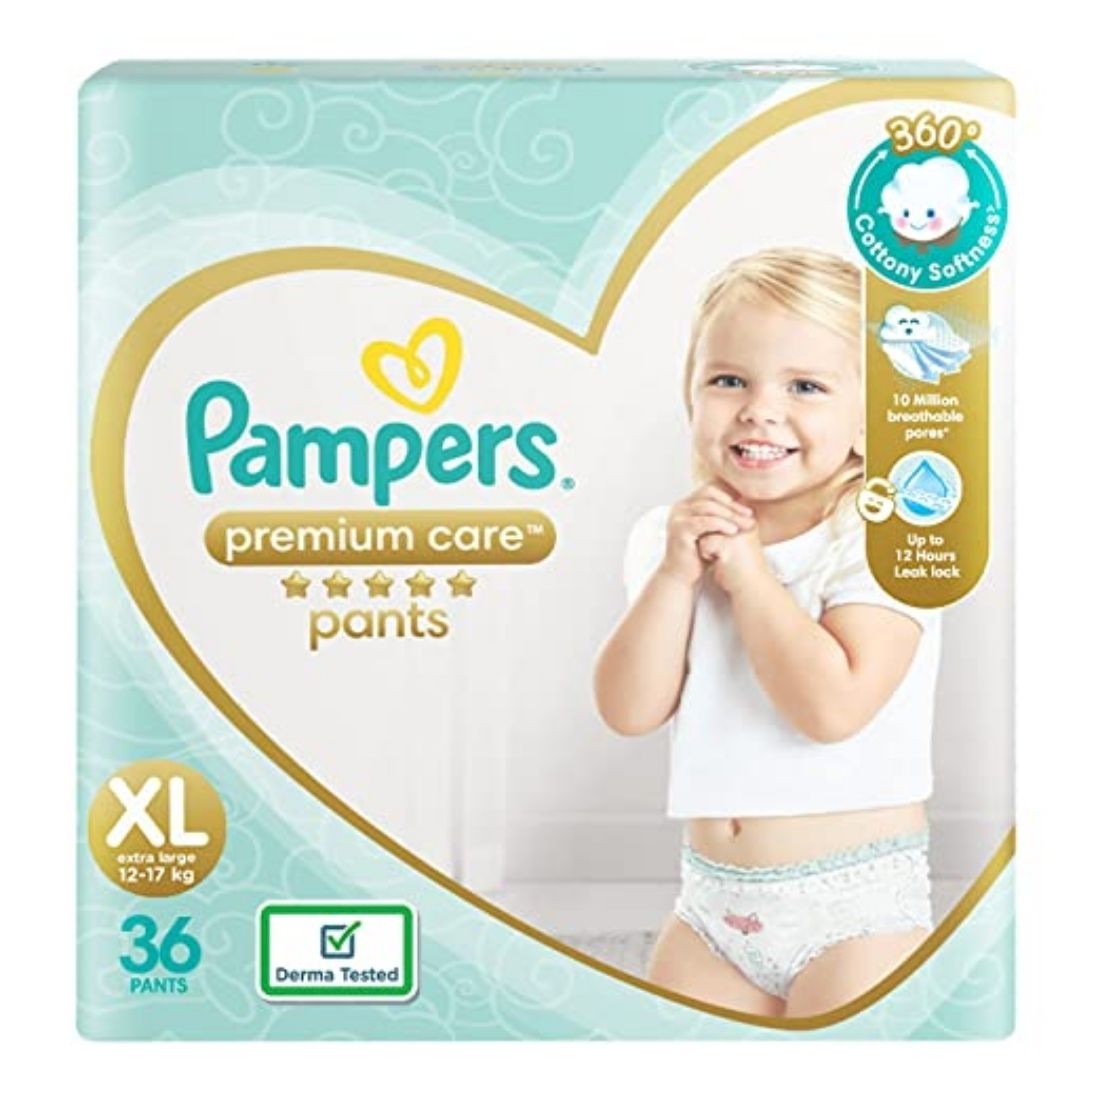 Buy Huggies Wonder Pants Diapers Small 42 Pcs Pouch Online At Best Price of  Rs 37425  bigbasket